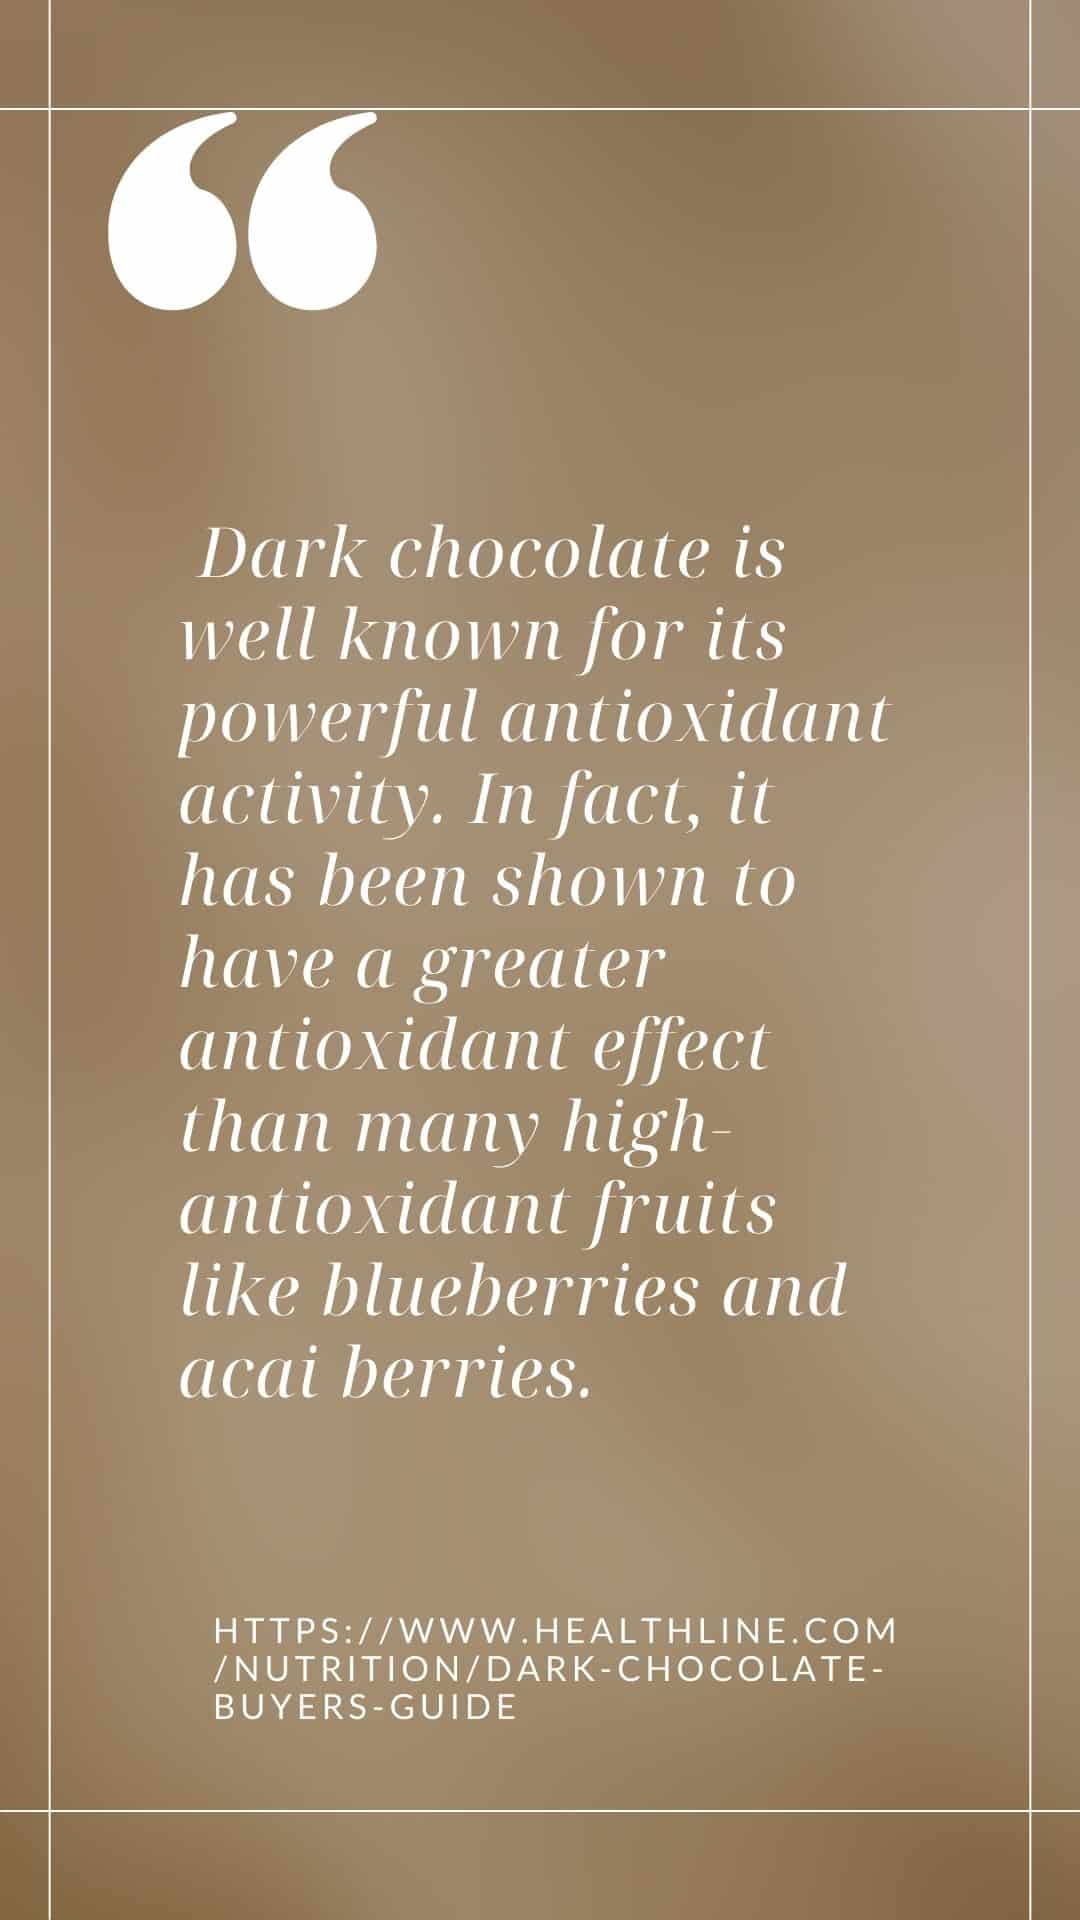 quote about dark chocolate as a powerful antioxidant